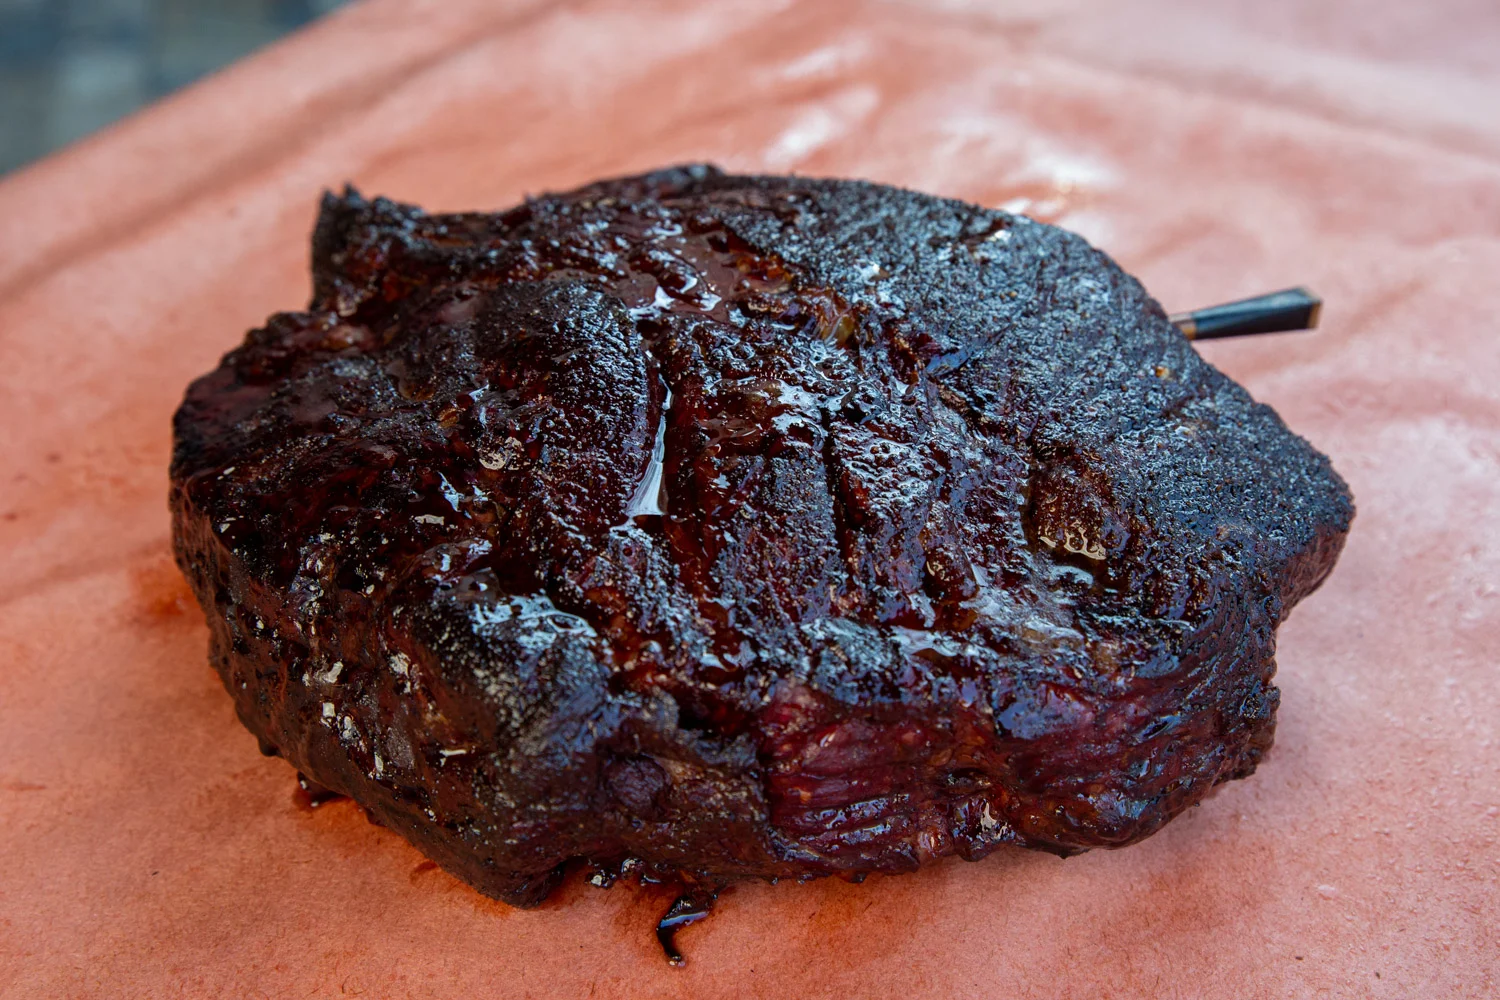 Juicy, glistening smoked chuck roast, fresh from the barbecue smoker, on peach paper. 